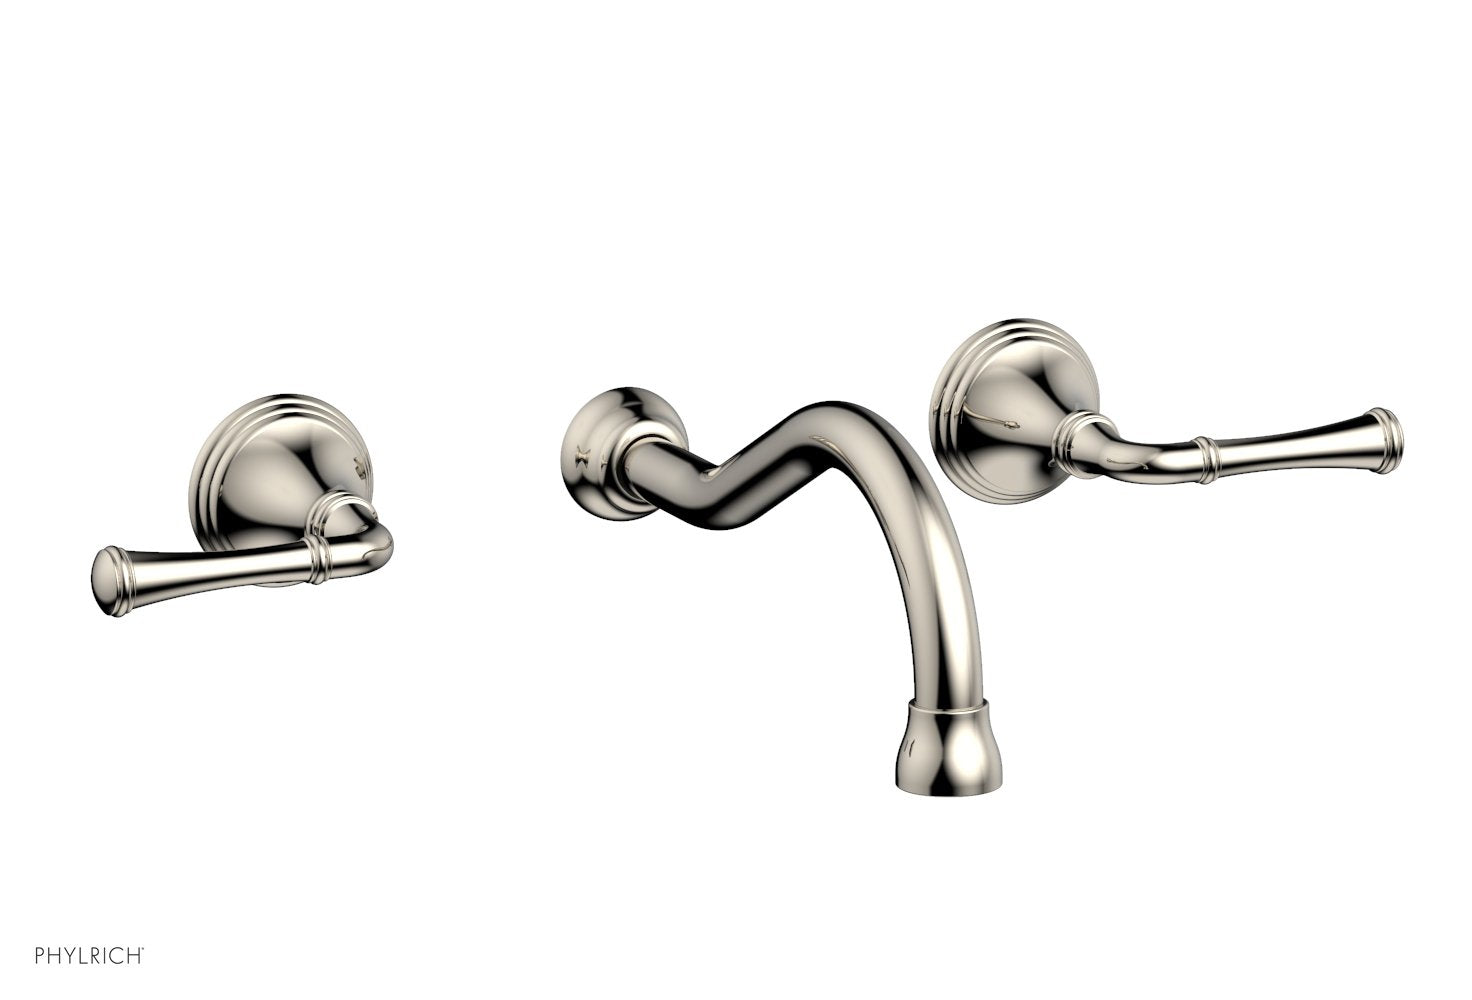 Phylrich 3RING Wall Lavatory Set - Straight Lever Handles